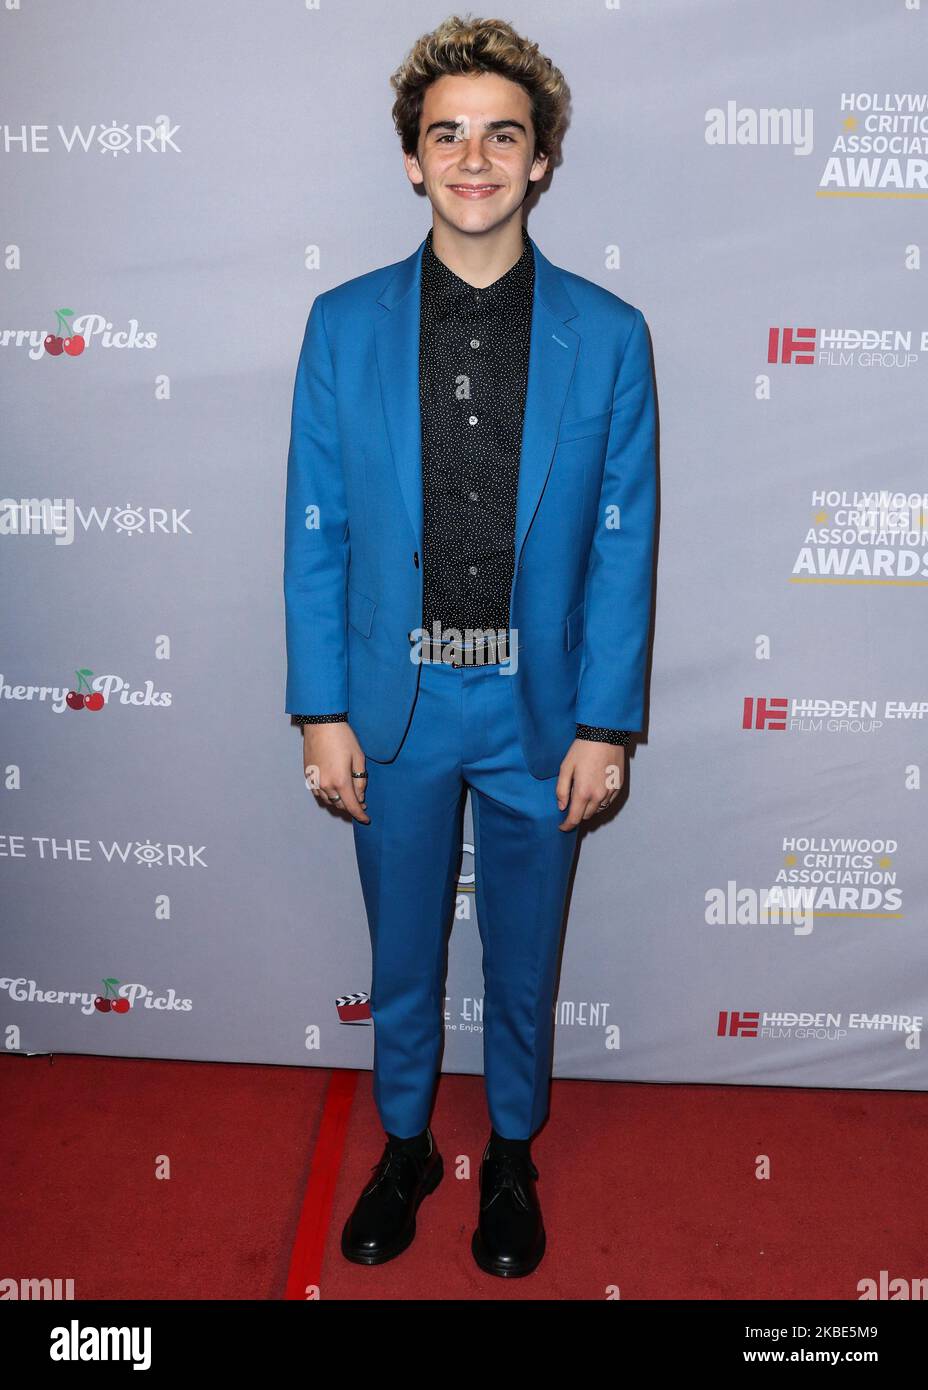 HOLLYWOOD, LOS ANGELES, CALIFORNIA, USA - JANUARY 09: Actor Jack Dylan Grazer arrives at the 3rd Annual Hollywood Critics' Awards held at the Taglyan Cultural Complex on January 9, 2020 in Hollywood, Los Angeles, California, United States. (Photo by Xavier Collin/Image Press Agency/NurPhoto) Stock Photo